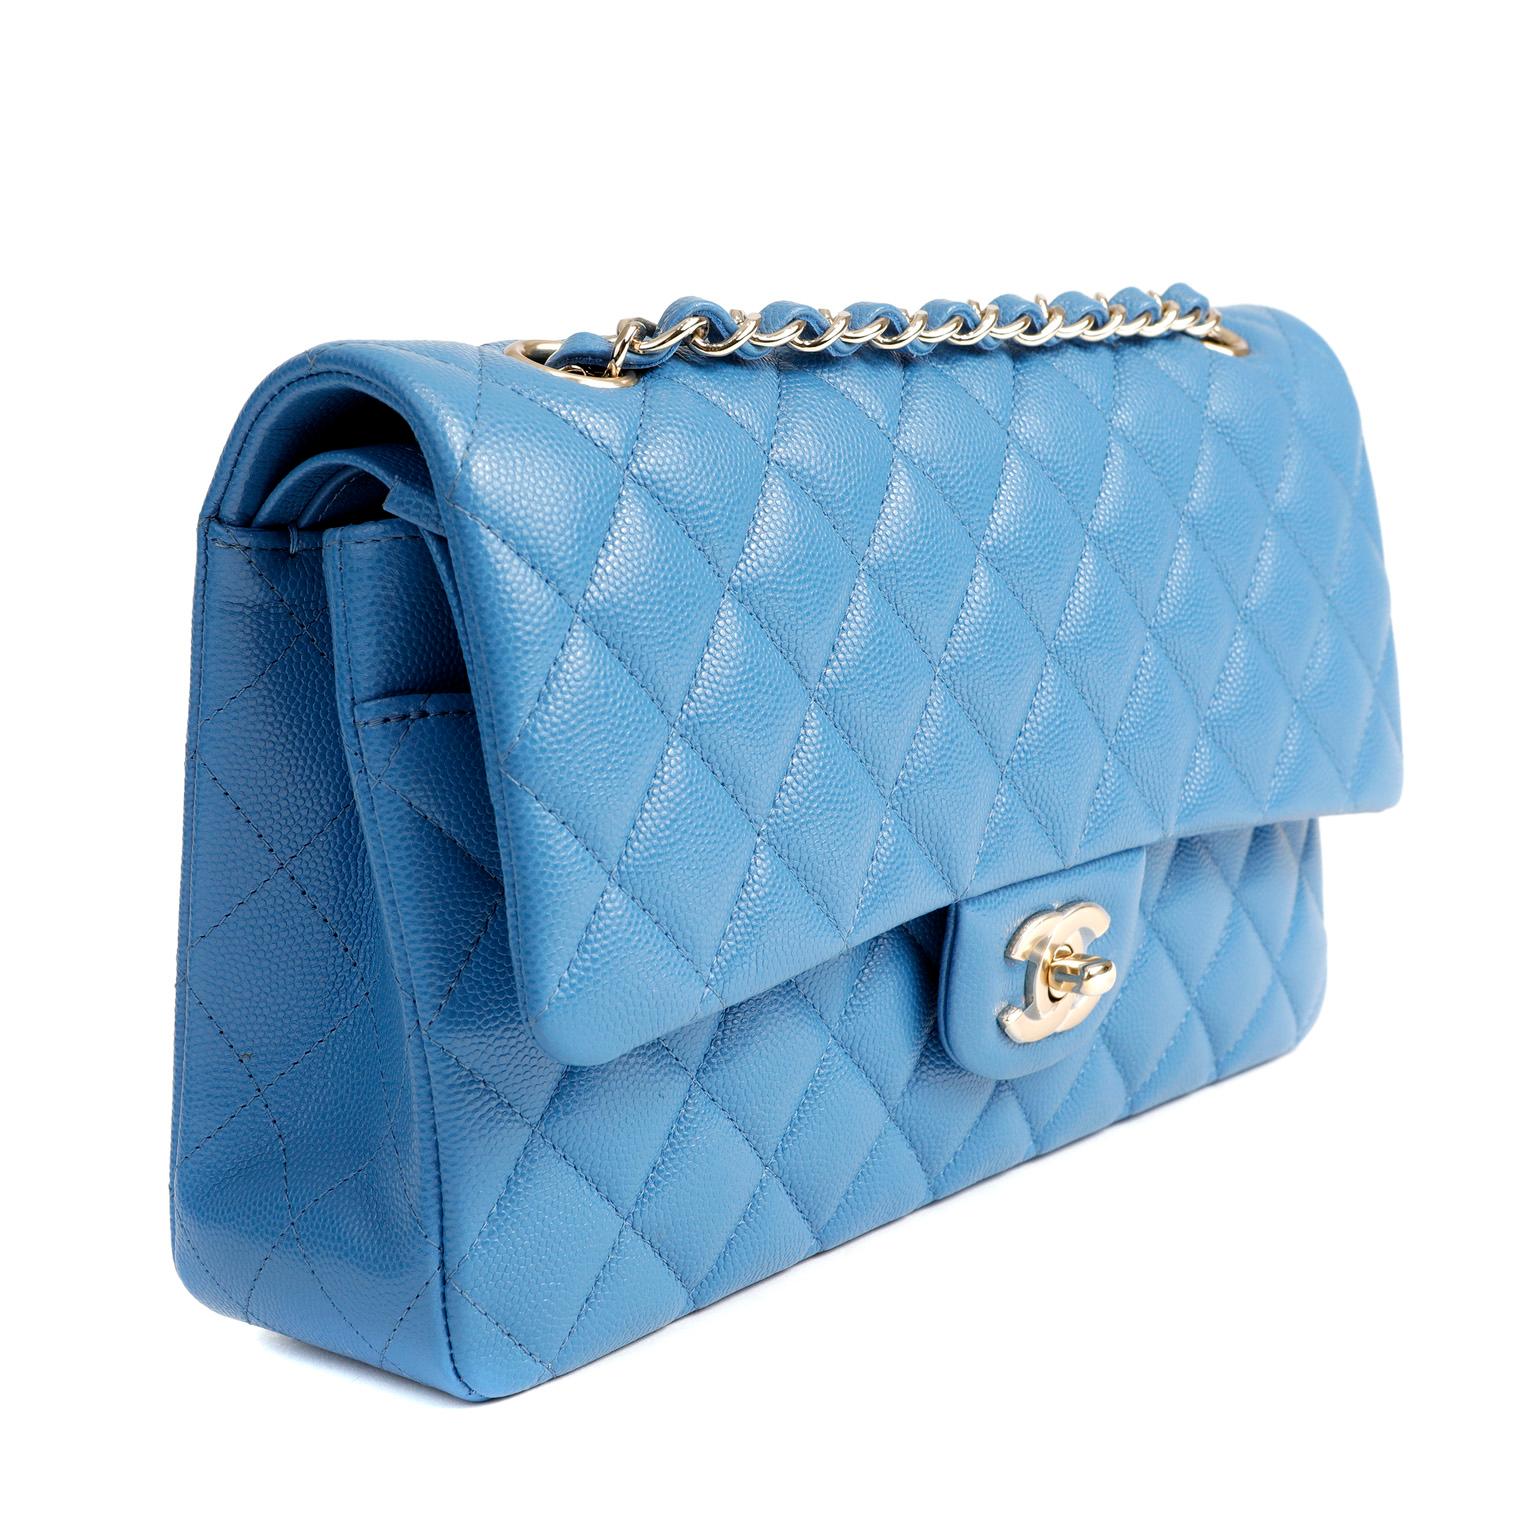 This authentic Chanel Periwinkle Caviar Leather Medium Classic Flap Bag is in pristine unworn condition, never carried.  A key piece in any sophisticated wardrobe, the Classic Flap is one of the most sought-after Chanel styles produced.
Durable and